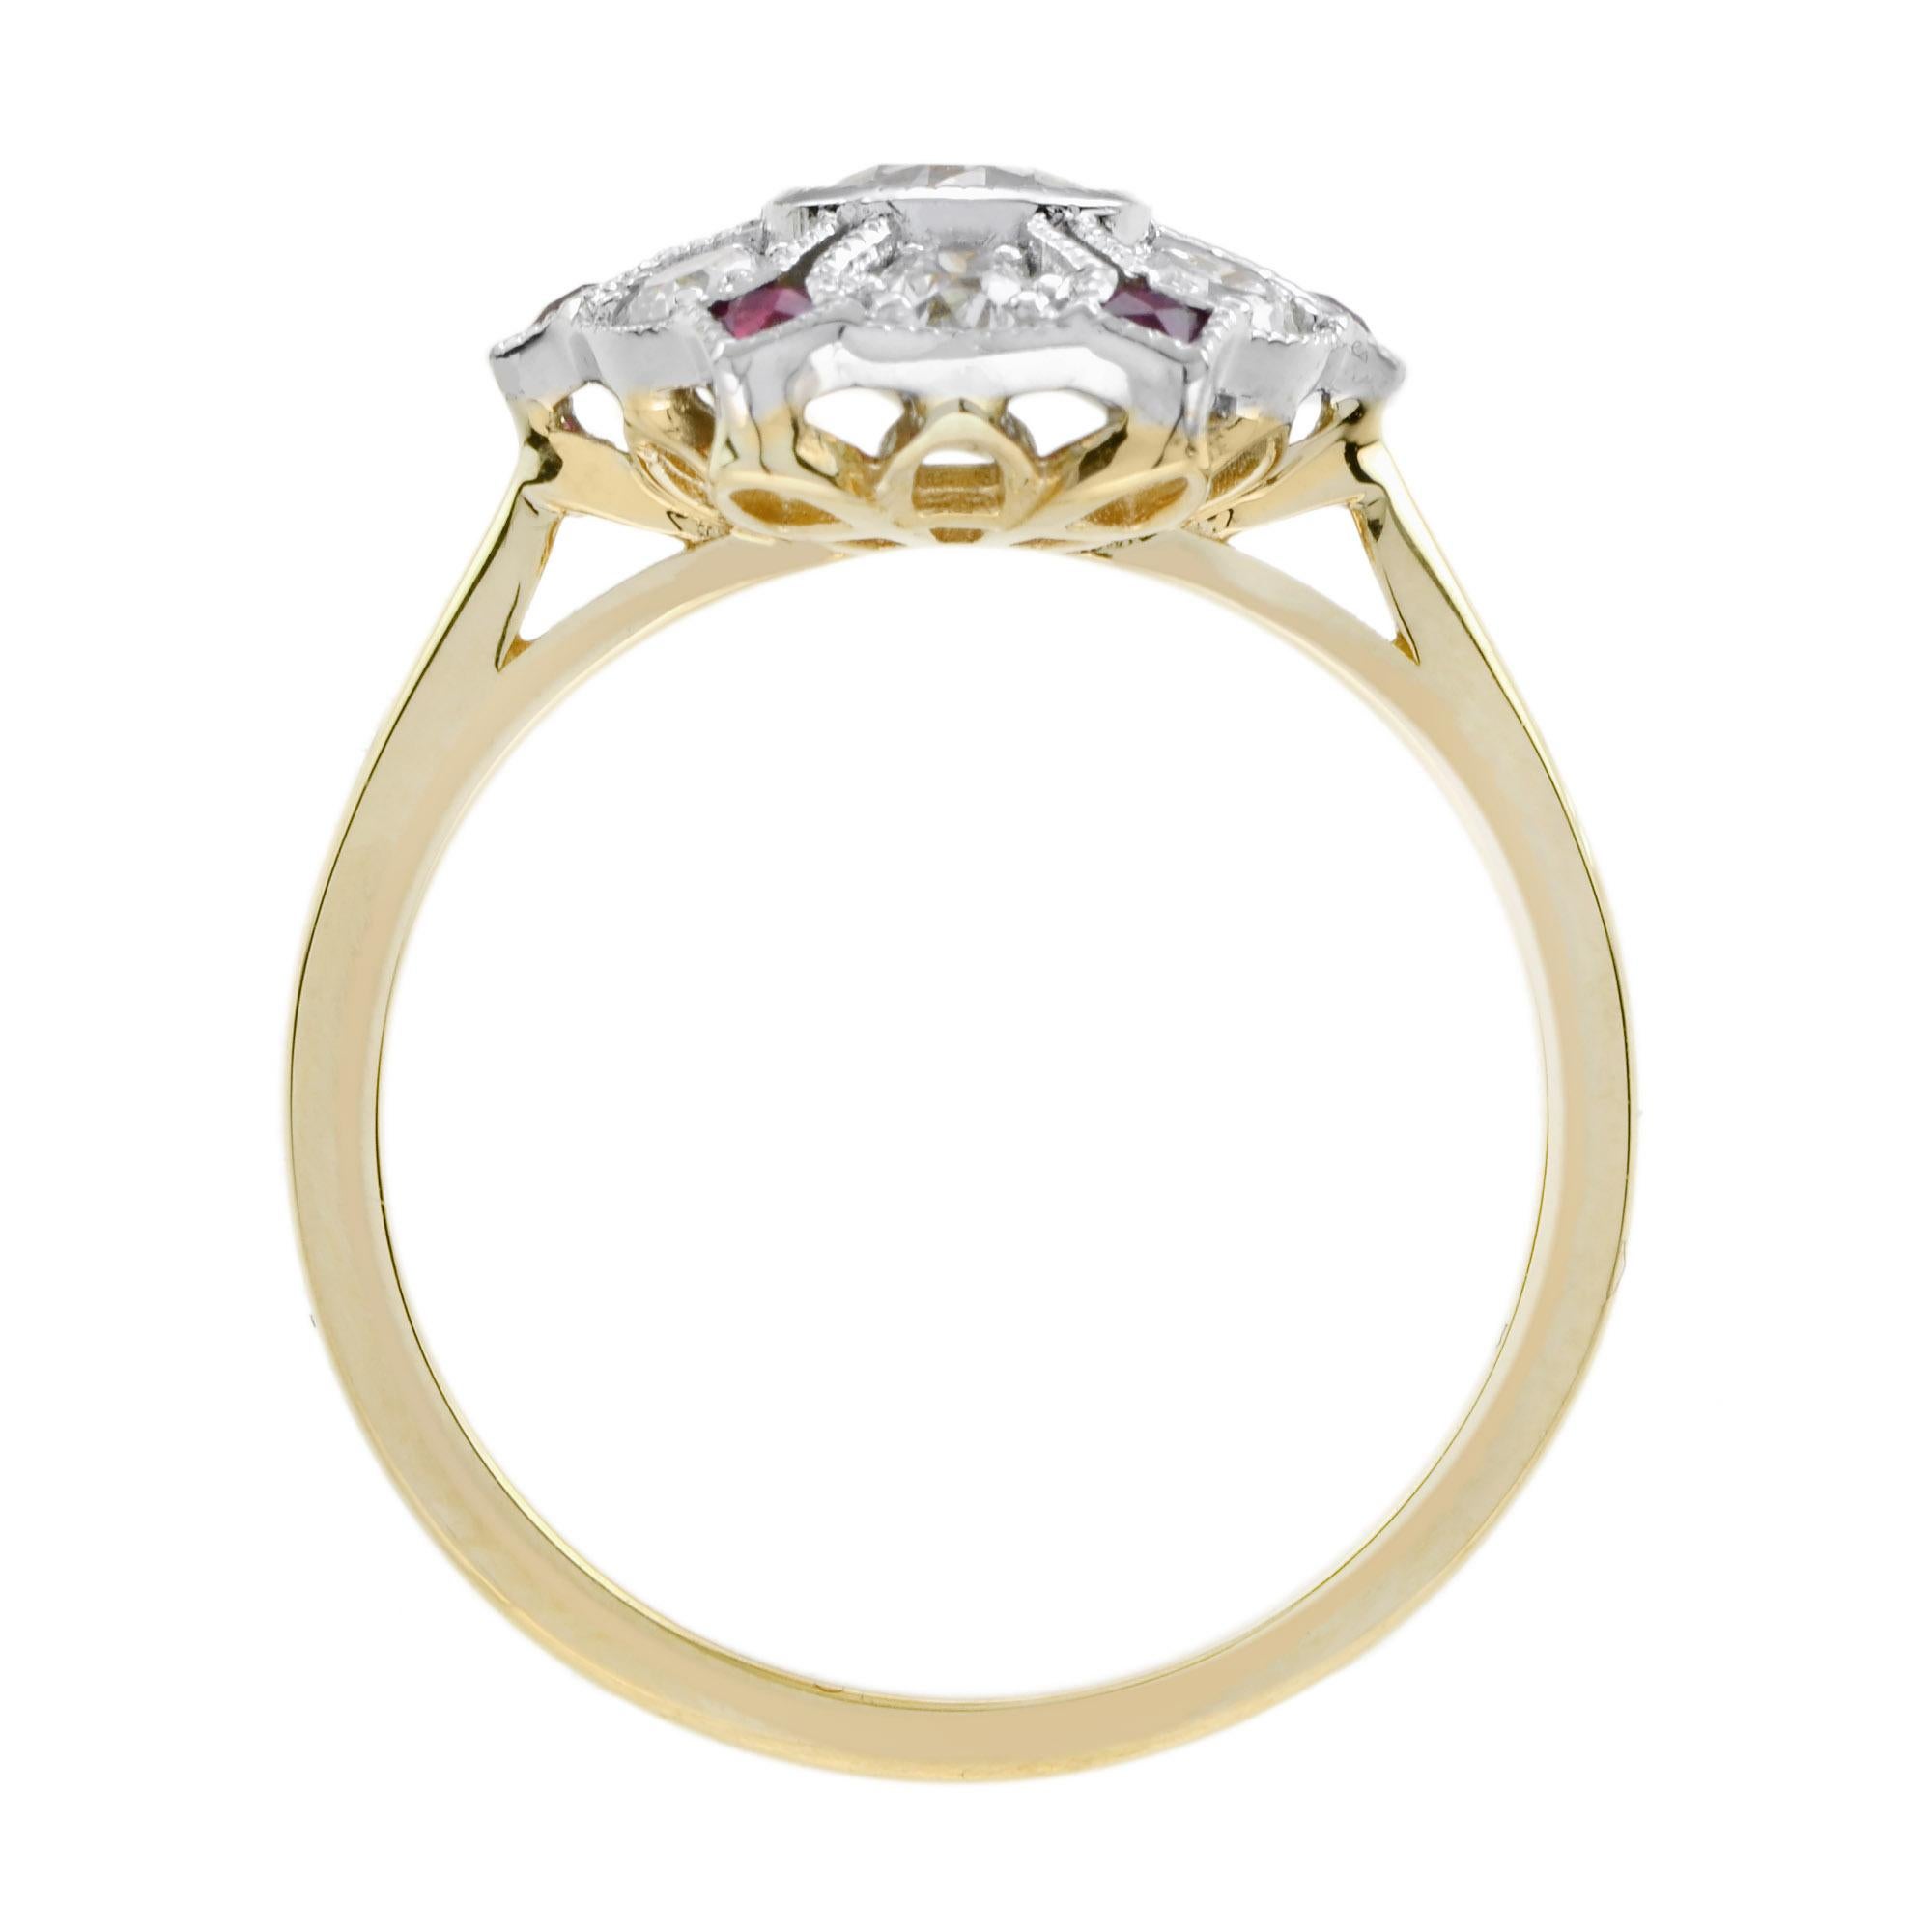 For Sale:  Diamond and Ruby Antique Style Floral Ring in 18k White Top Yellow Gold 7